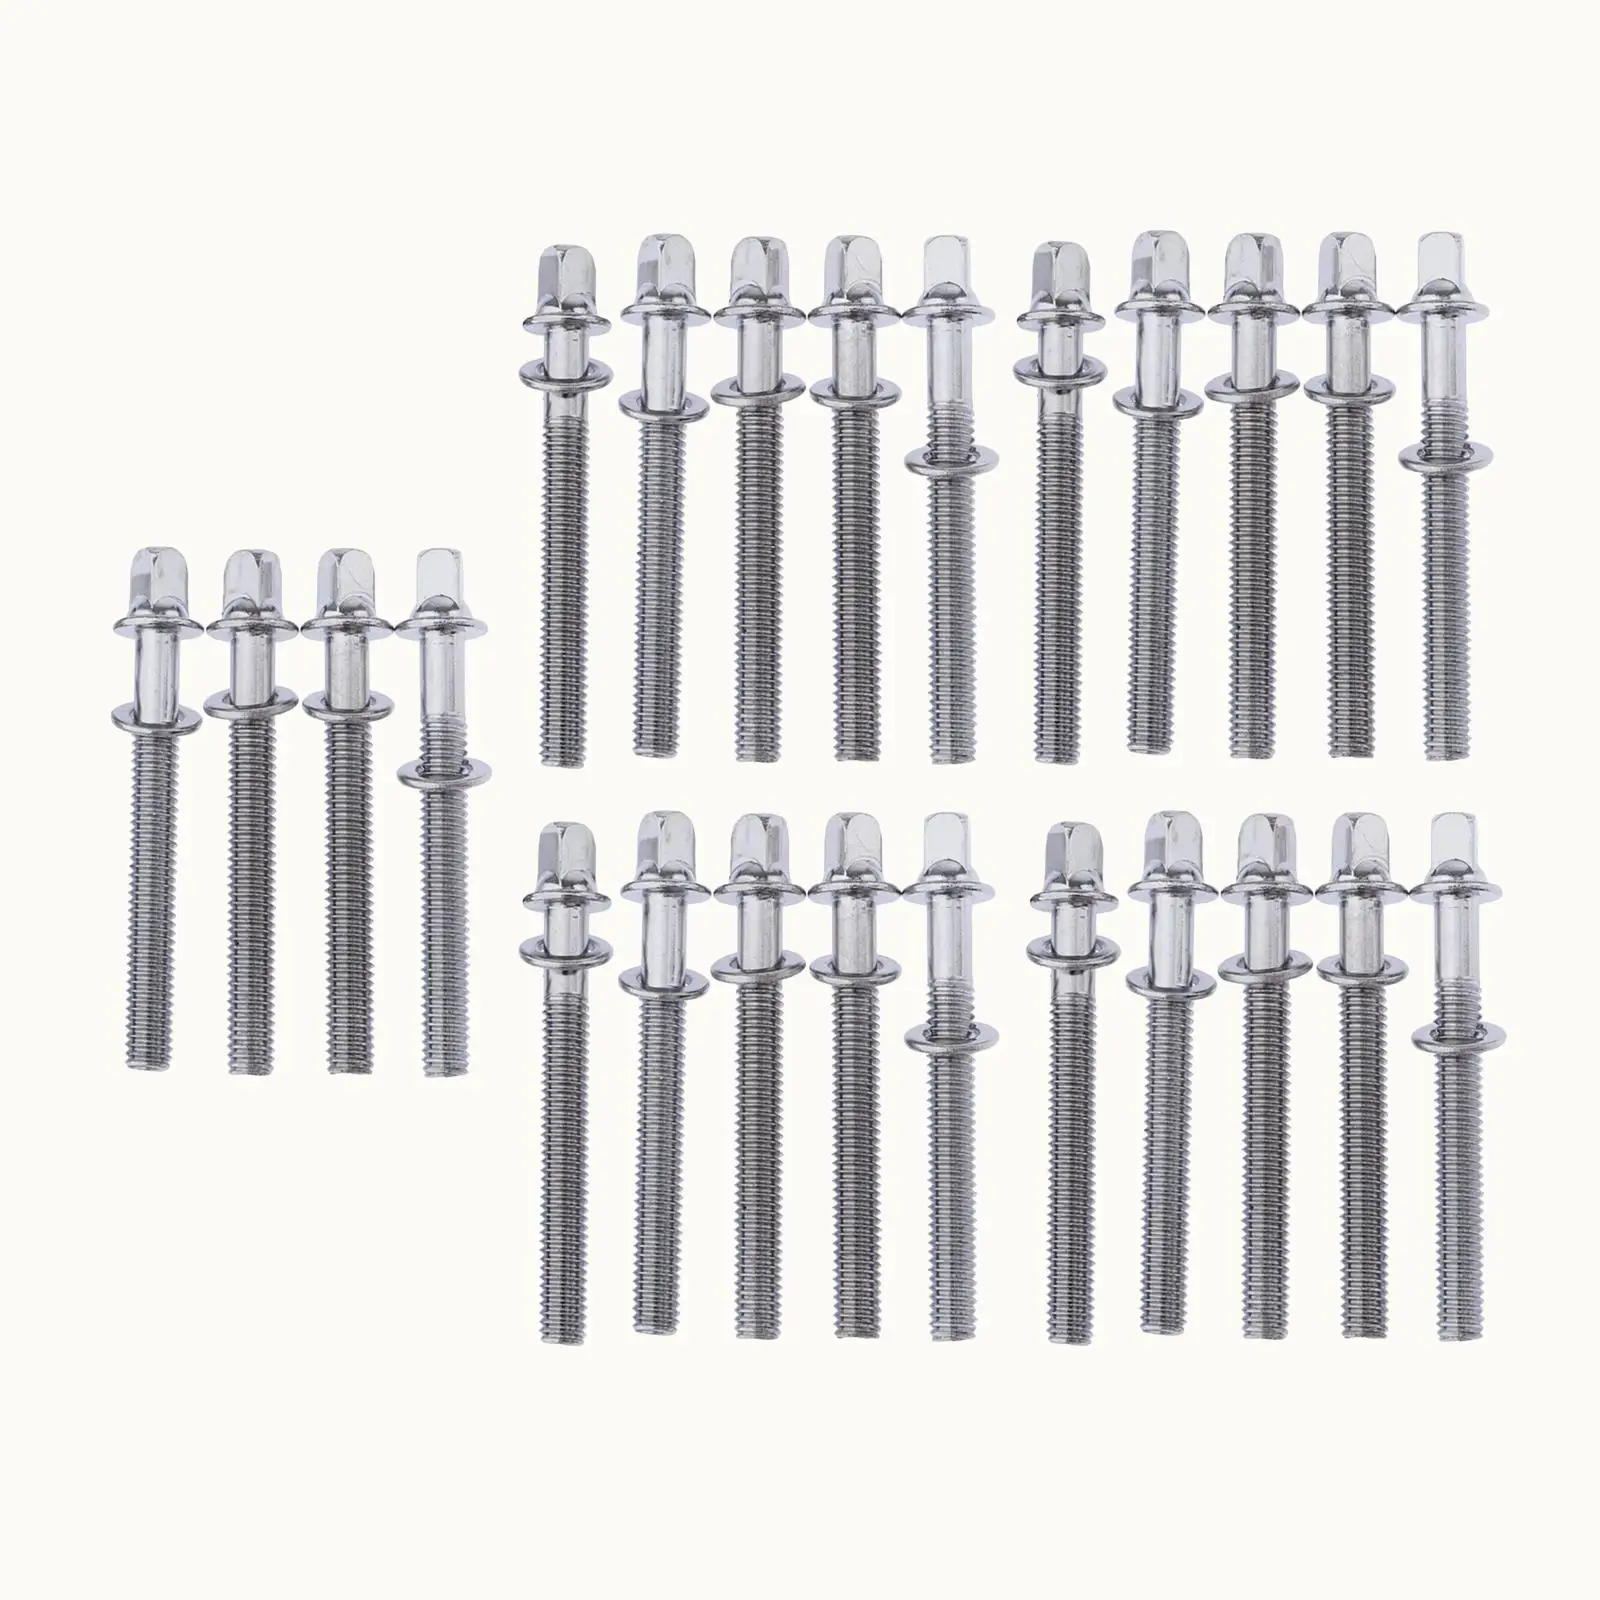 24 Pieces Drum Screws Screw Rod Replacement Accessory Tension Rods Drum Hardware Parts Accessory Drum Tension Rods Percussion